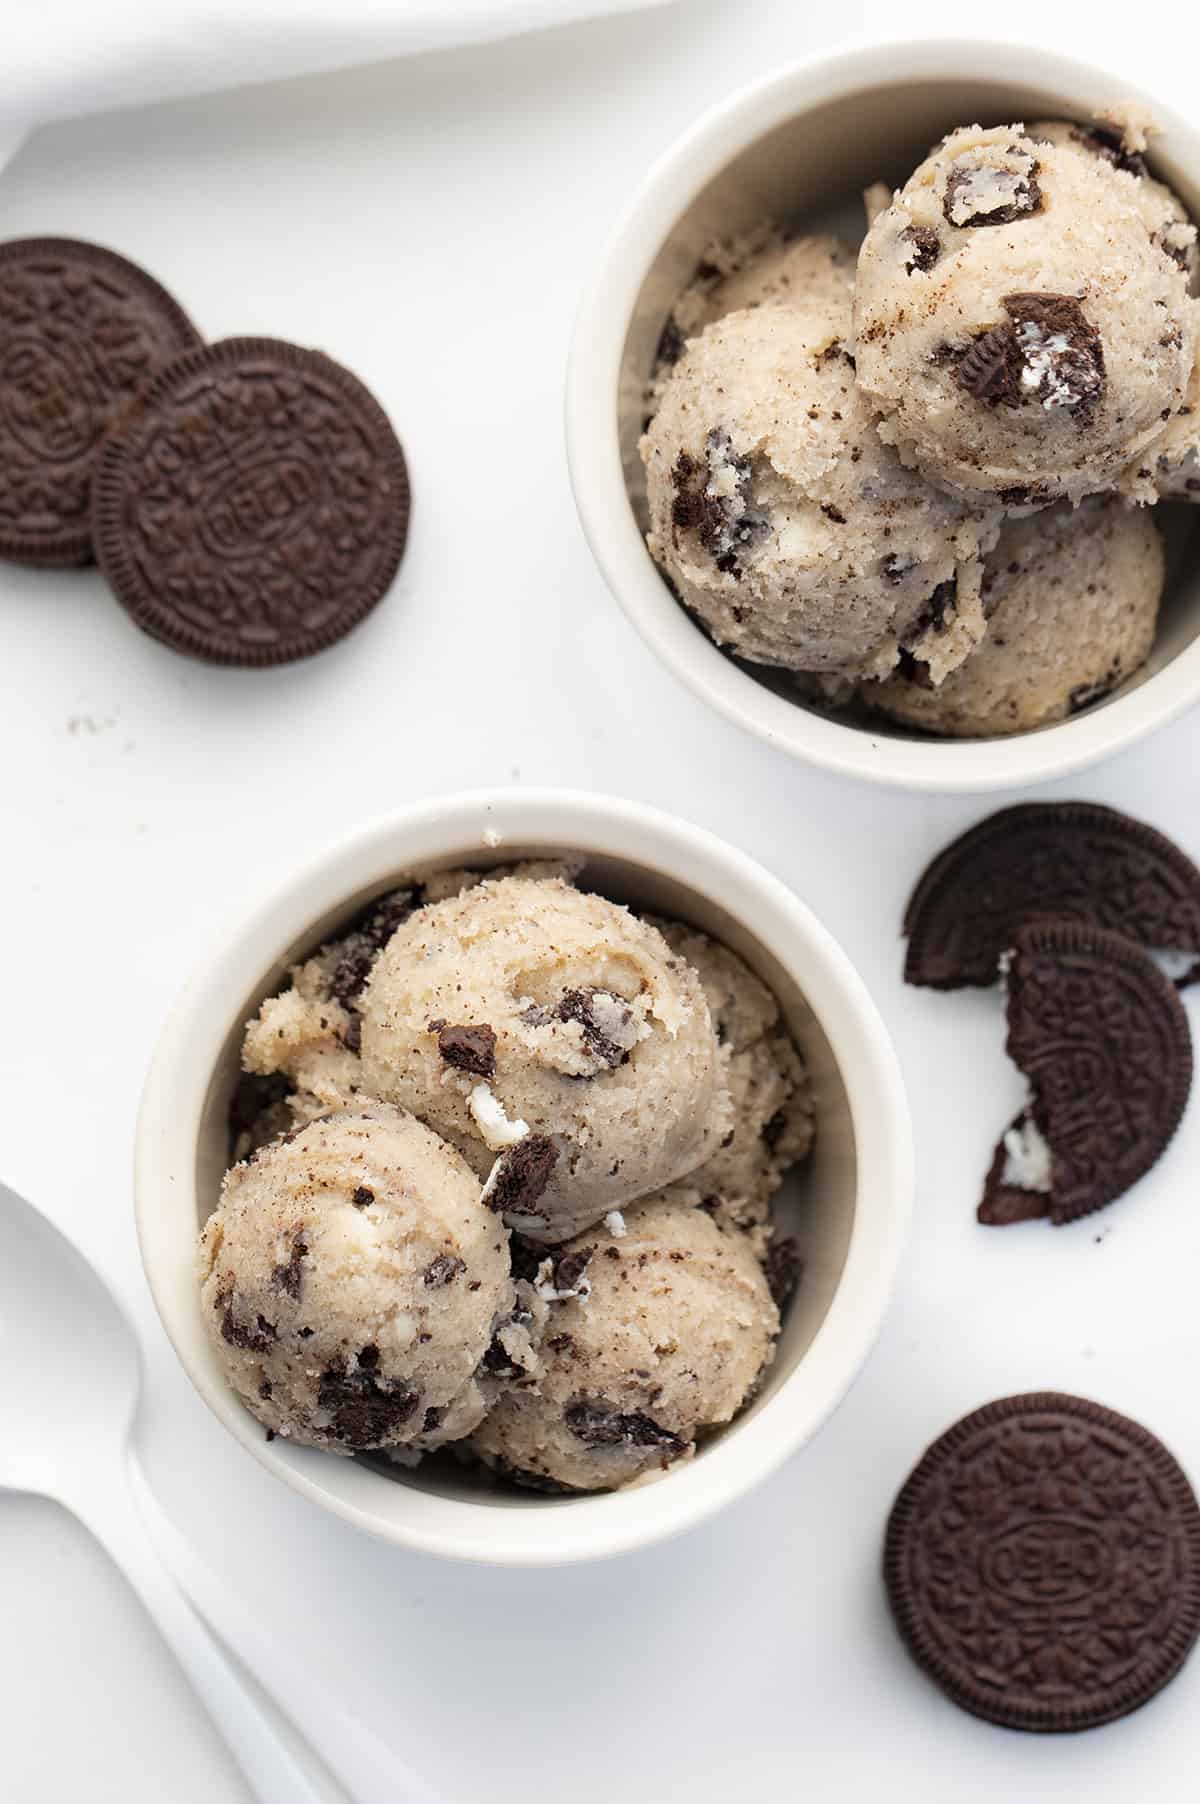 Bowls of Oreo Cookie Dough with Oreos and Spoons